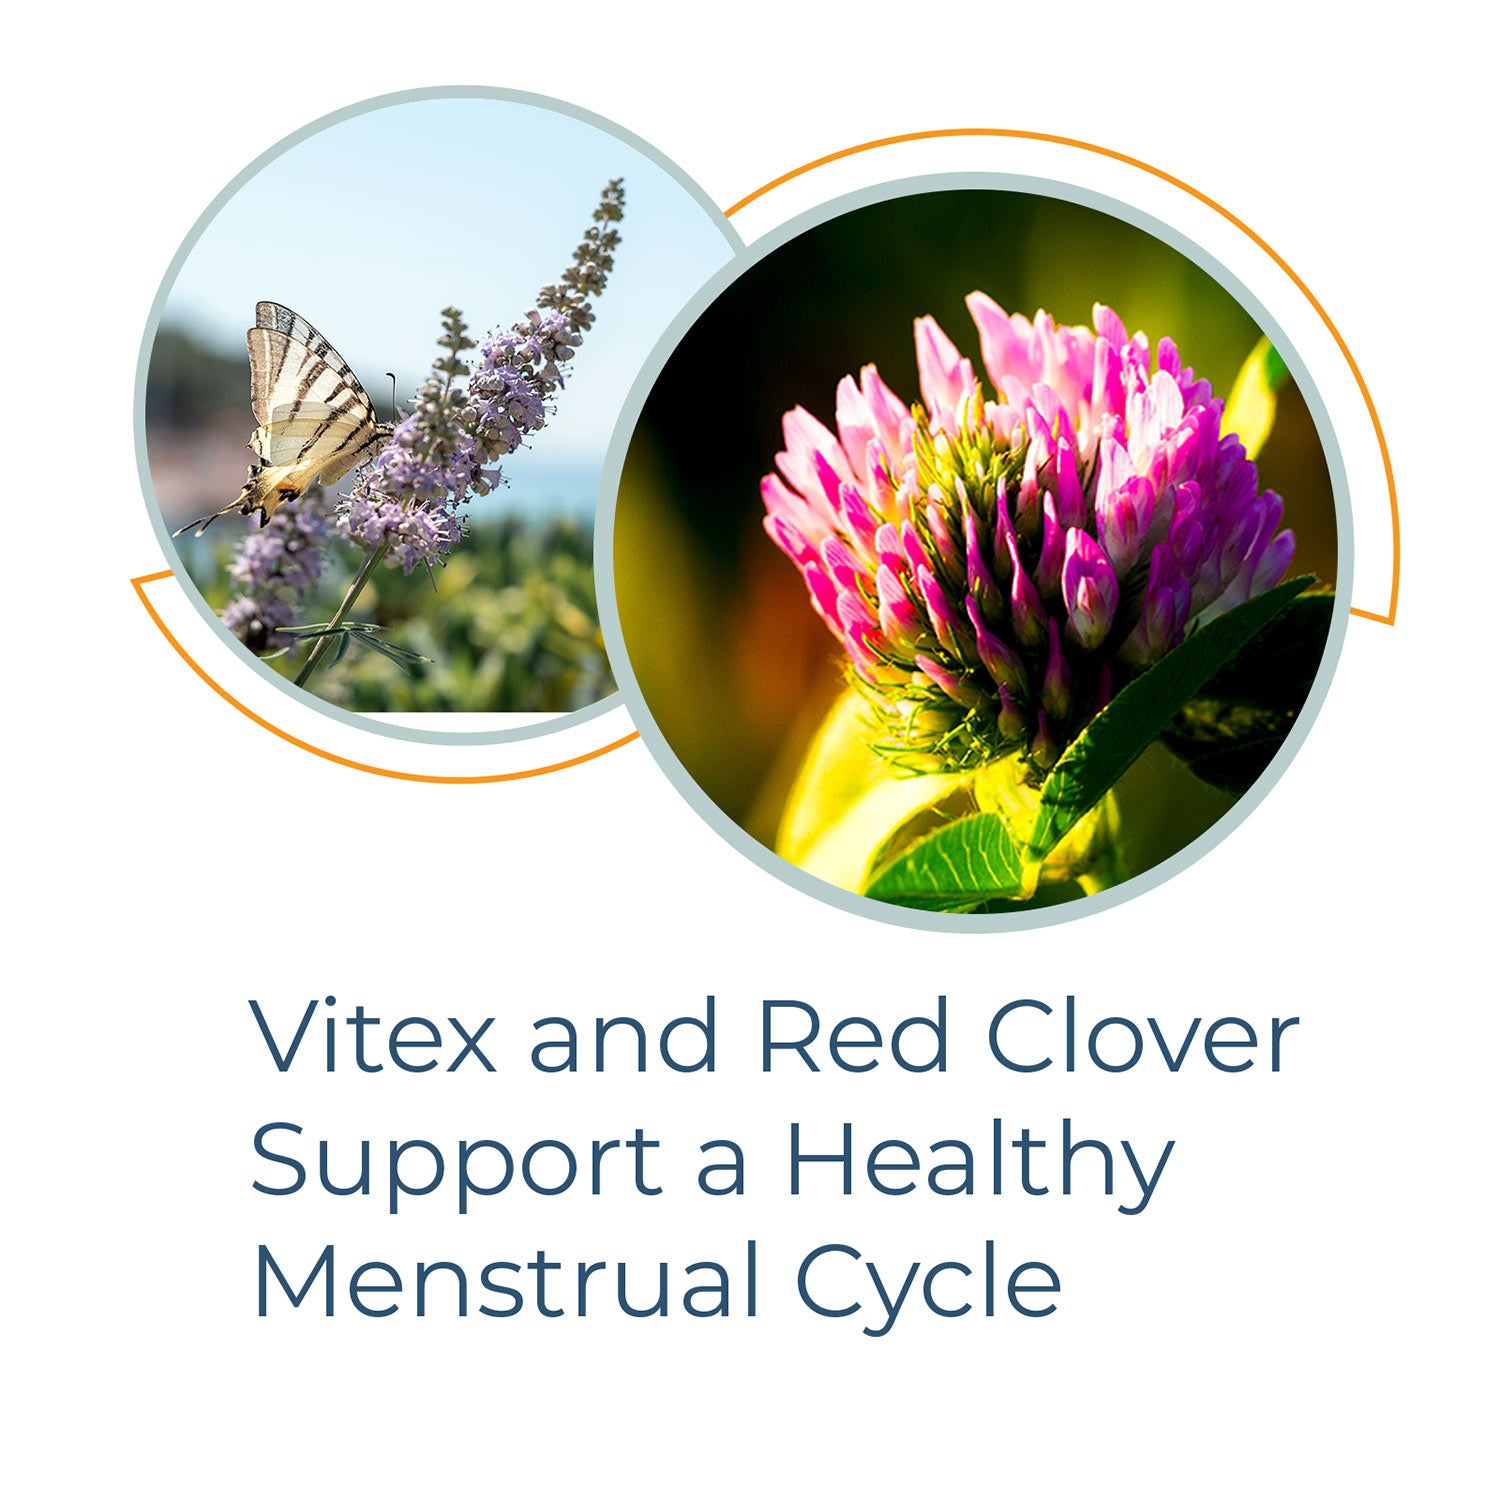 FertilAid for Women - Vitex and Red Clover Support a Healthy Menstrual Cycle